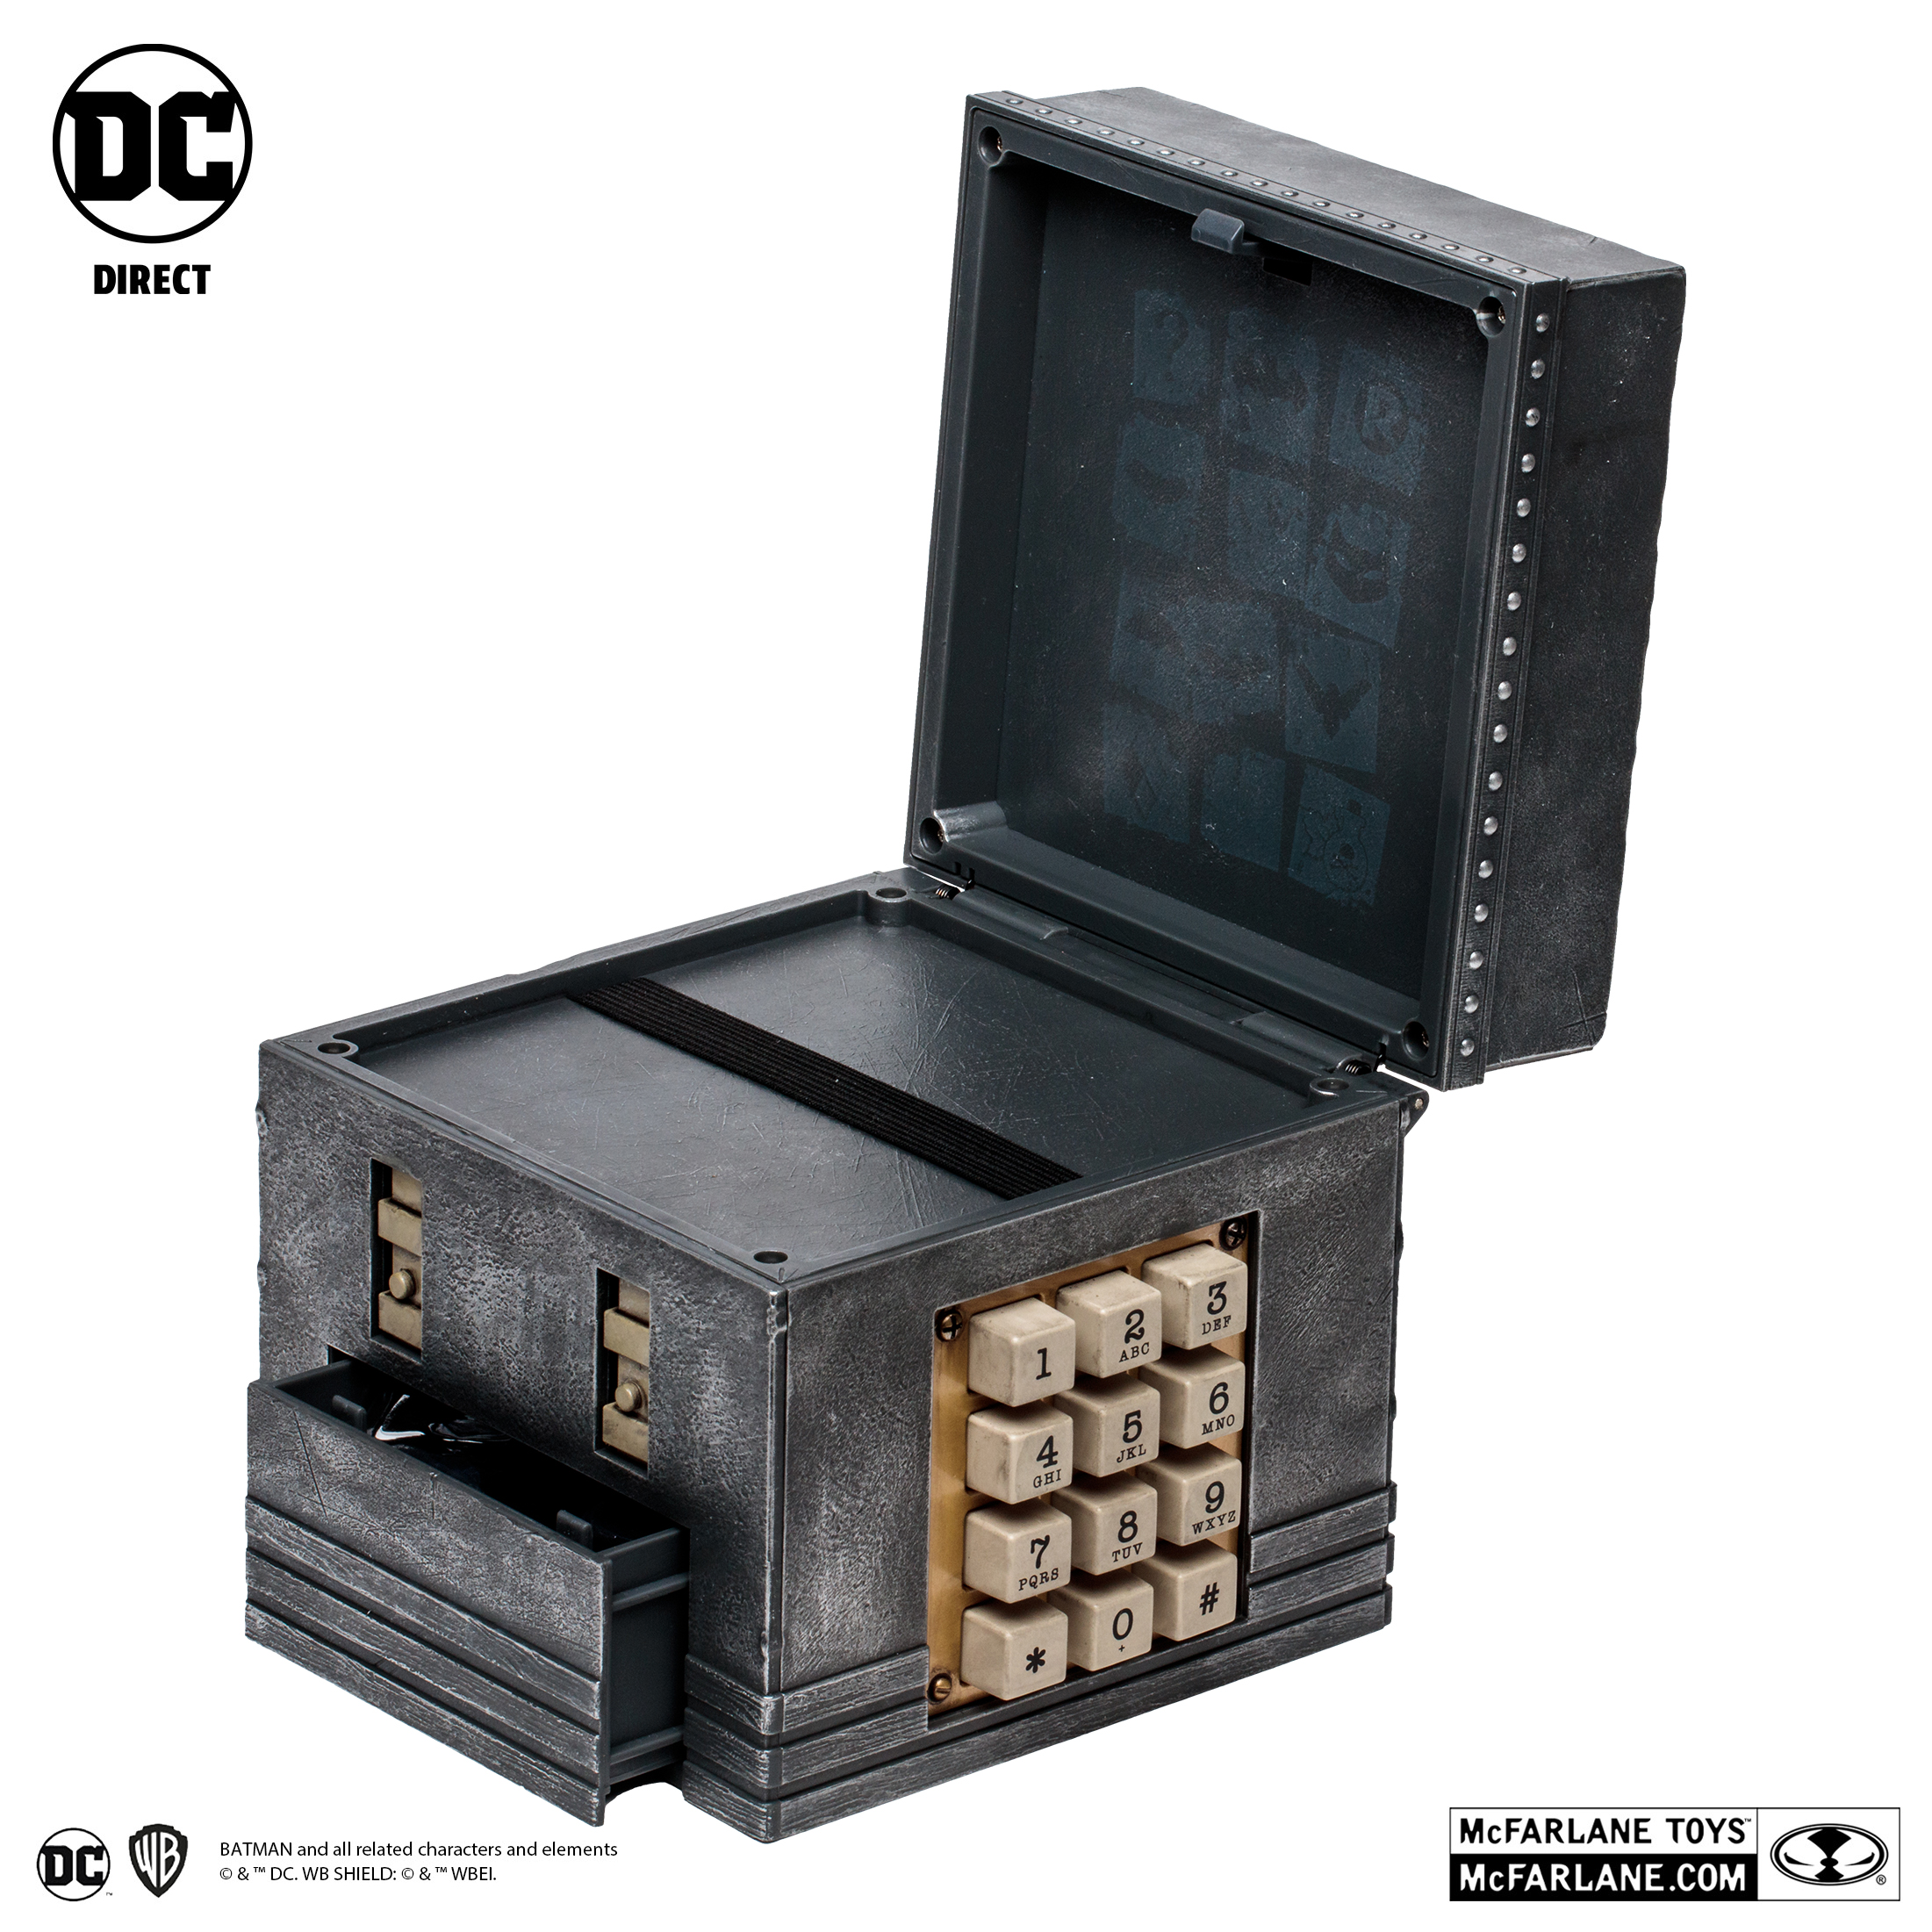 The Riddler Puzzle Box: Detective Mode Variant